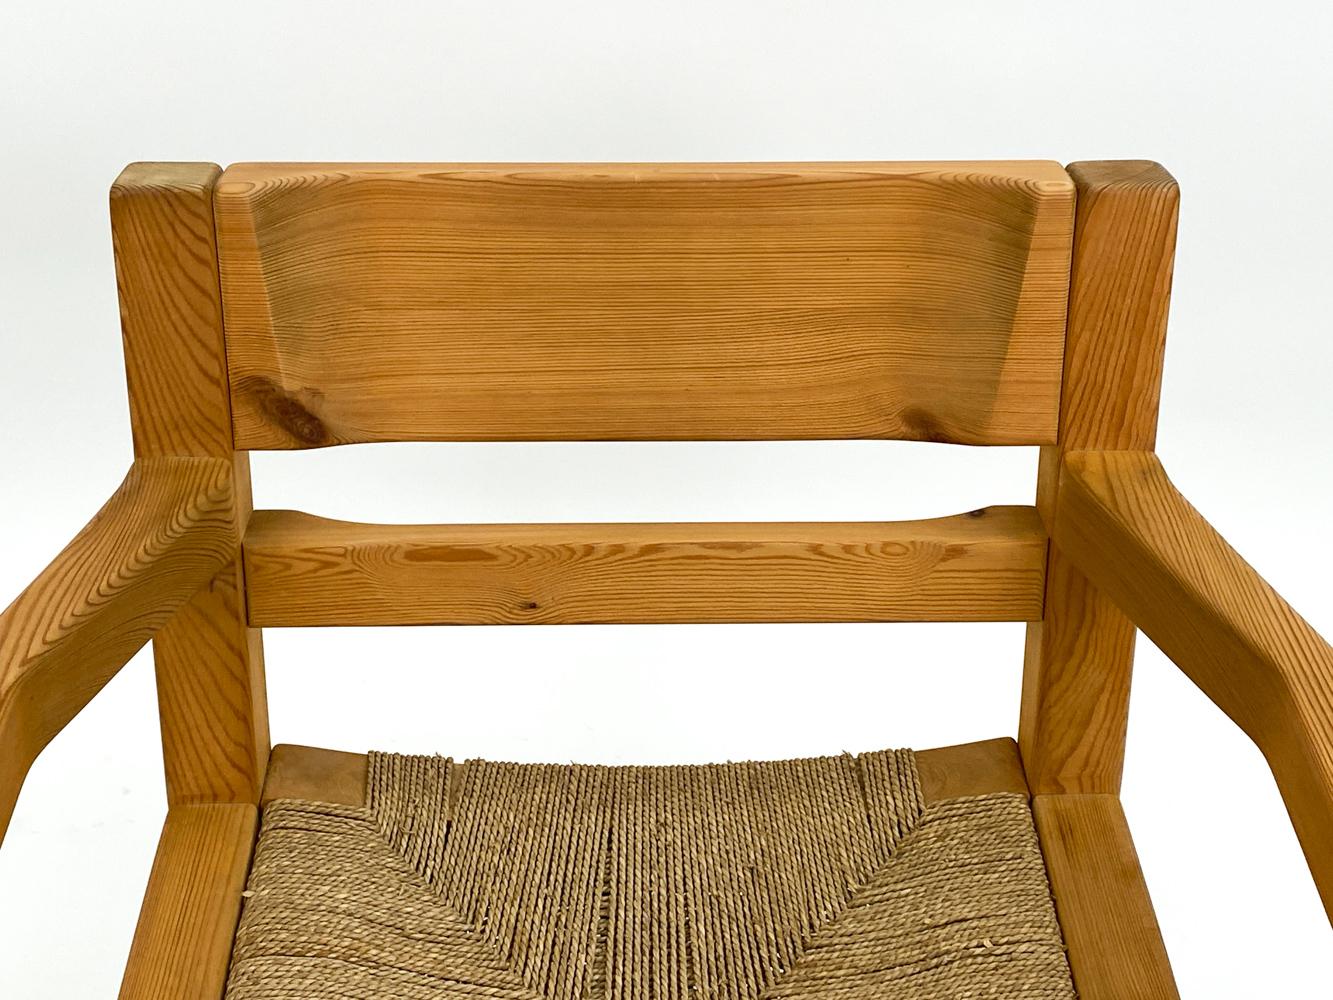 Pair of Tage Poulsen Pine & Rush Seat Lounge Chairs, c. 1970's For Sale 6